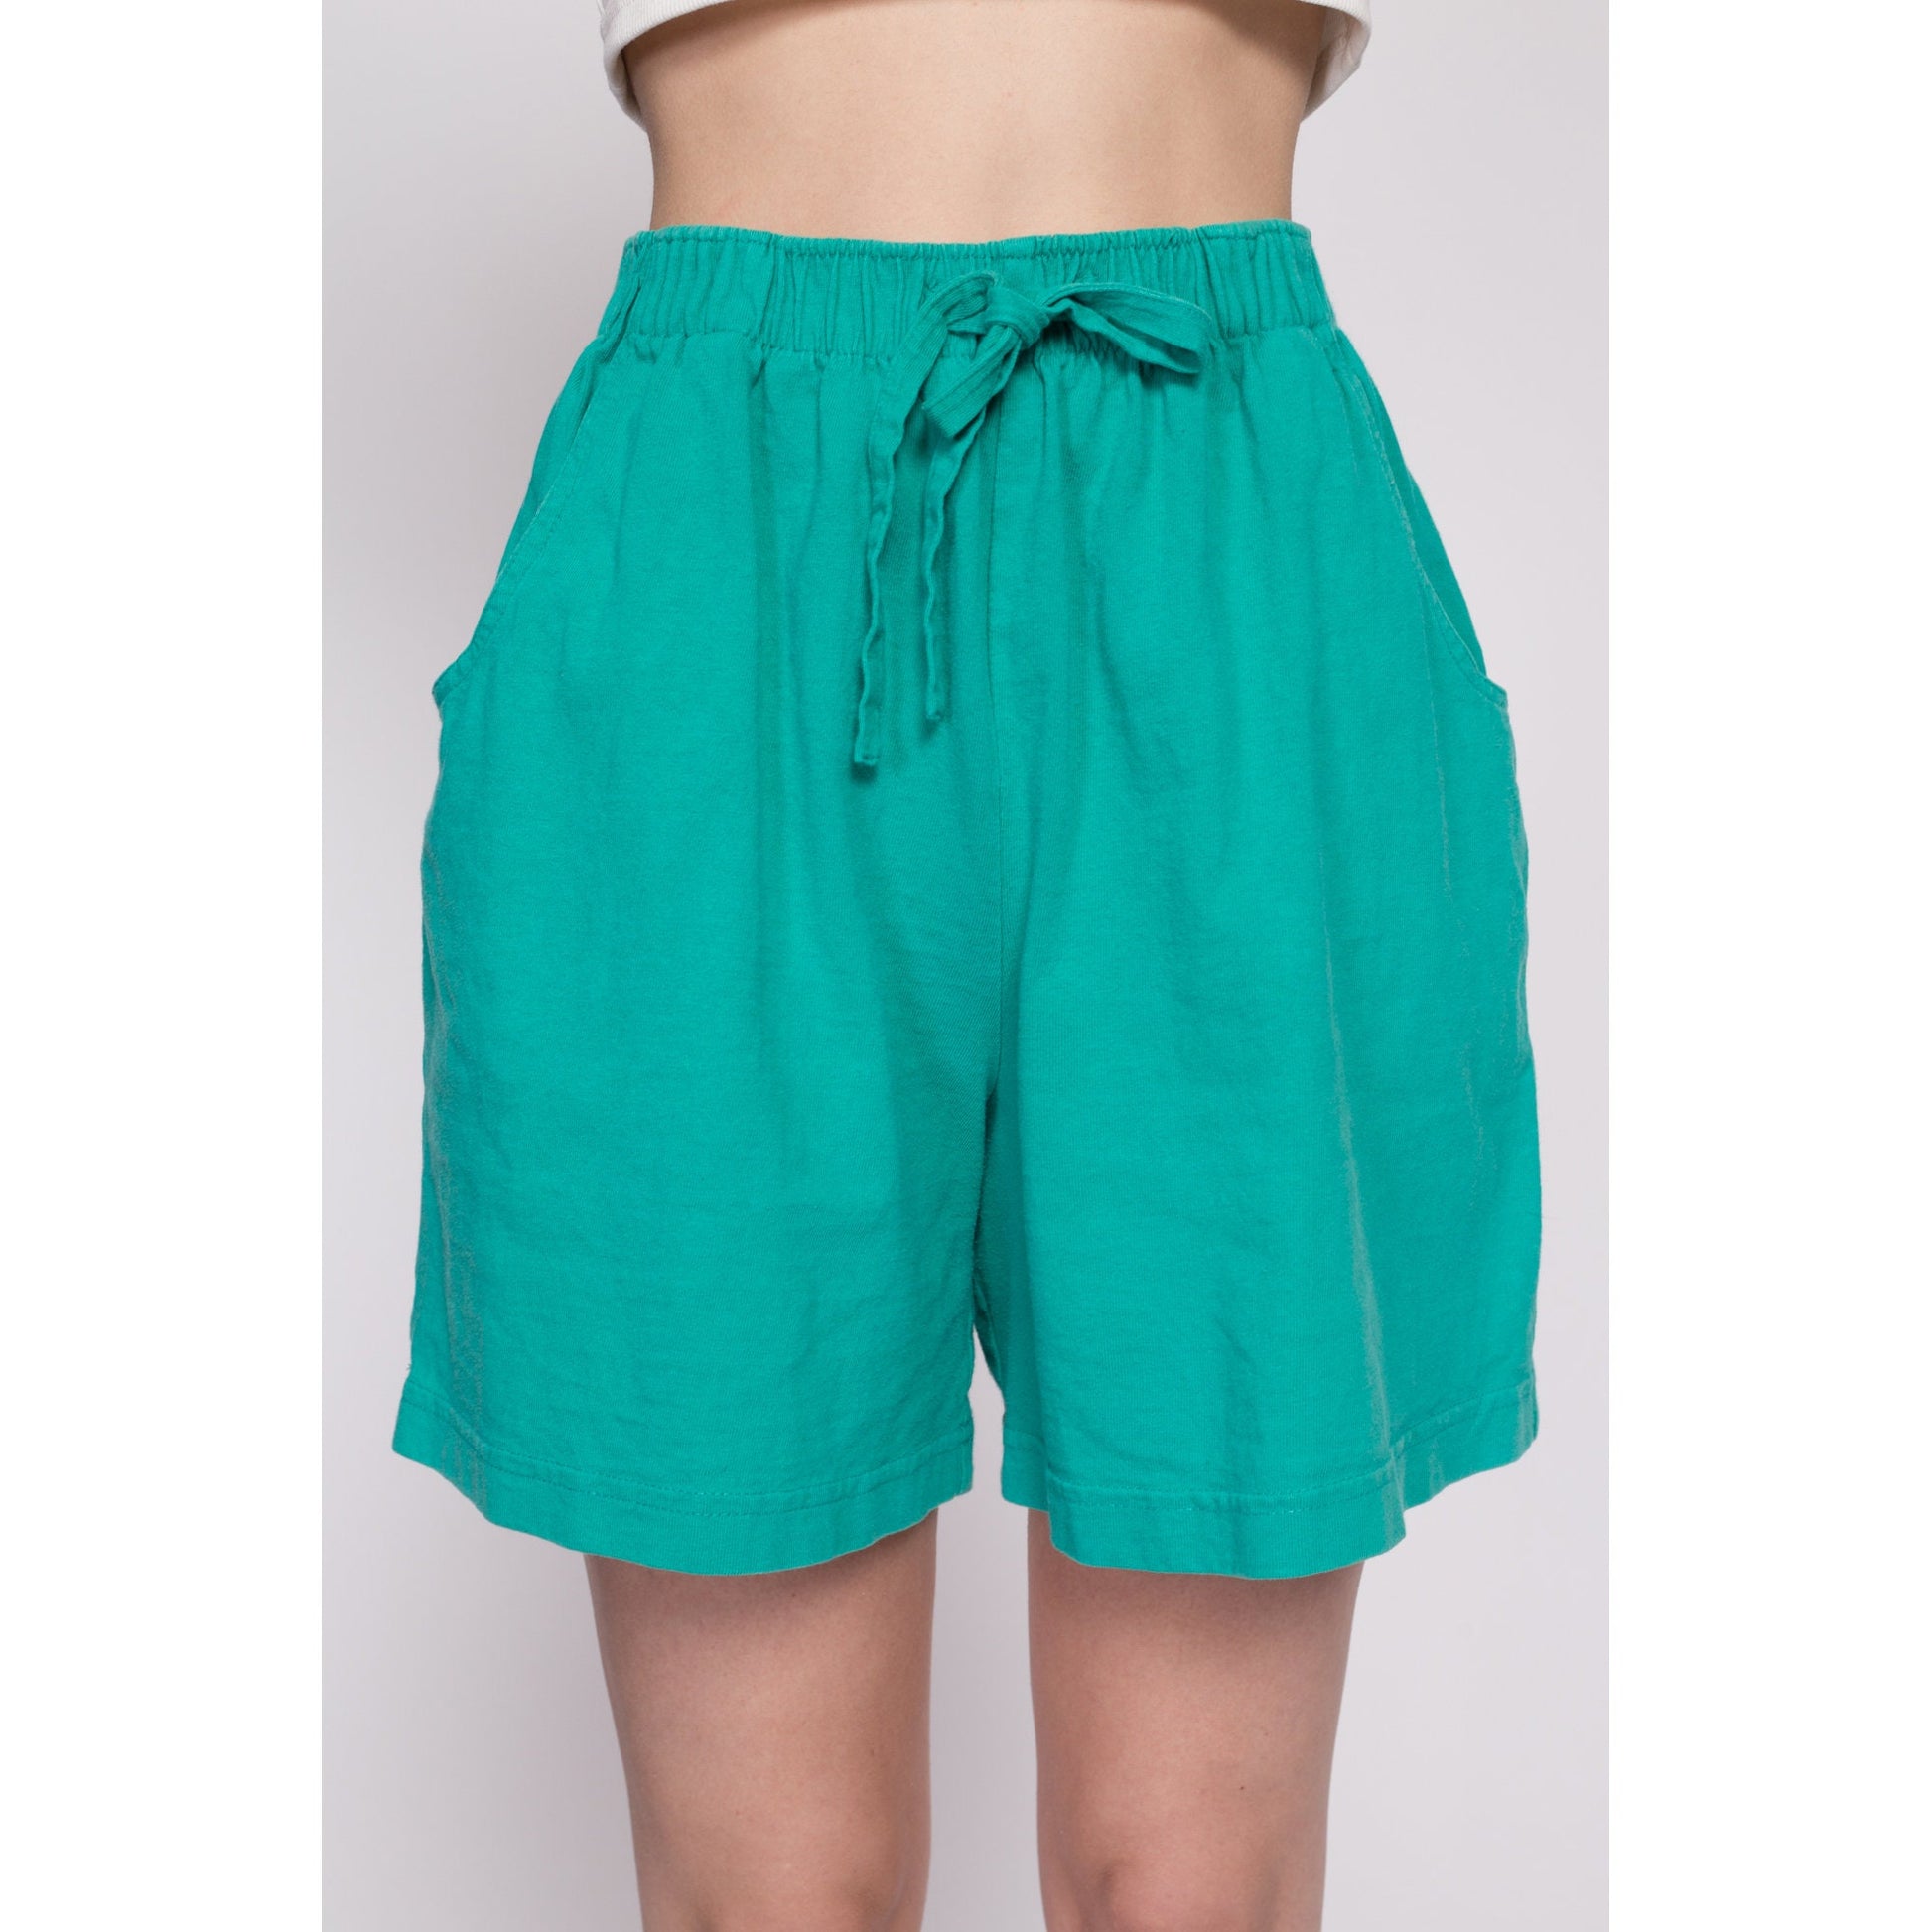 80s Teal Green Cotton Elastic Waist Shorts - Small to Medium | Vintage High Rise Wide Leg Causal Pocket Lounge Shorts